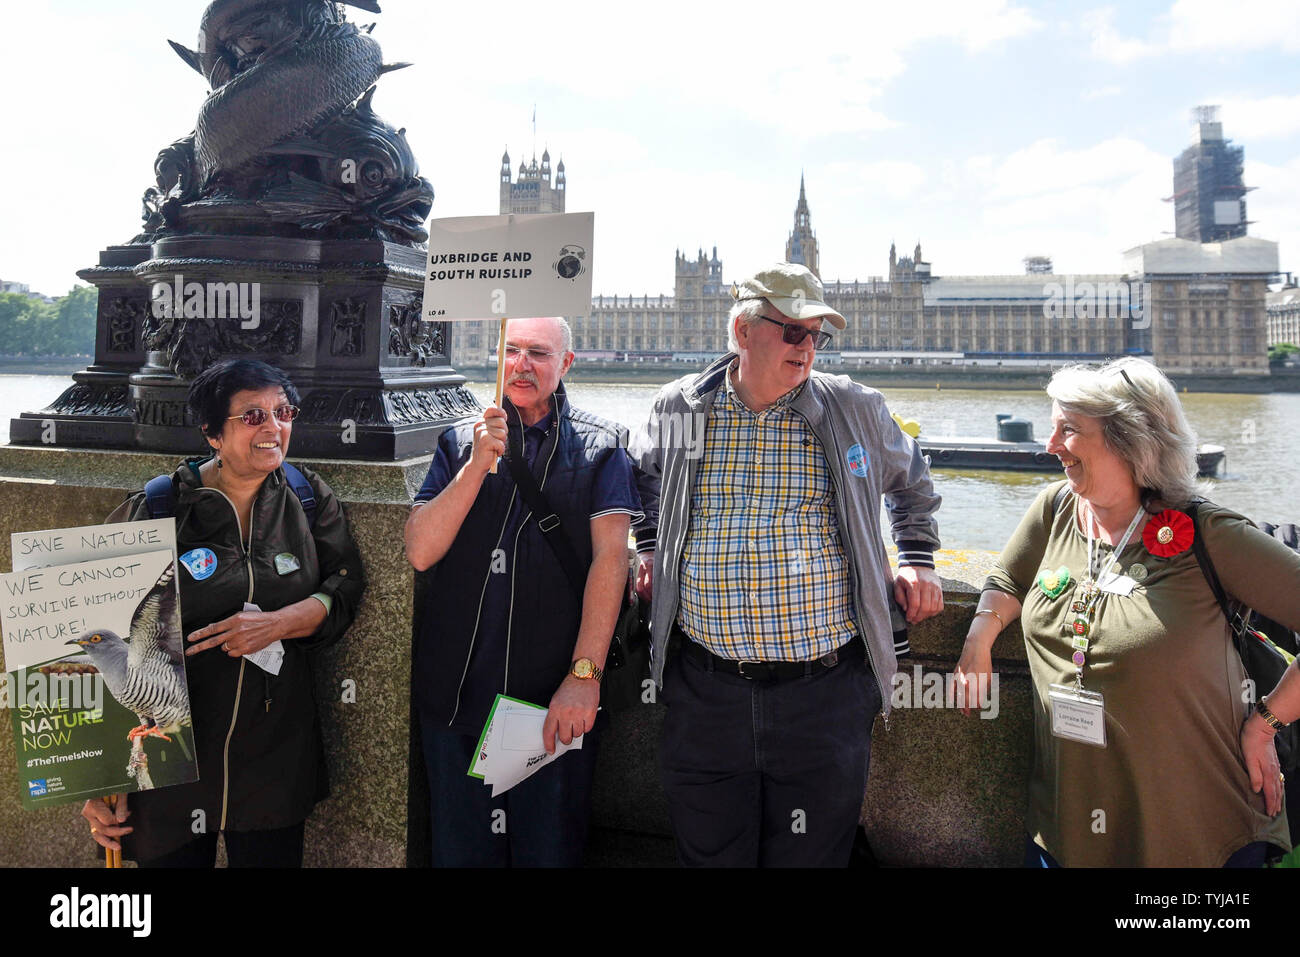 London, UK.  26 June 2019.  Constituents from Uxbridge and South Ruislip wait to meet their local MP Boris Johnson (who failed to show) during a 'Time Is Now' mass lobby around Parliament.  Activists are attempting to deliver a message to MPs that to tackle the environmental crisis, a strong Environment Bill is passed that can restore nature, cut plastic pollution and improve air quality.  Similar gatherings are taking place across the UK.   Credit: Stephen Chung / Alamy Live News Stock Photo